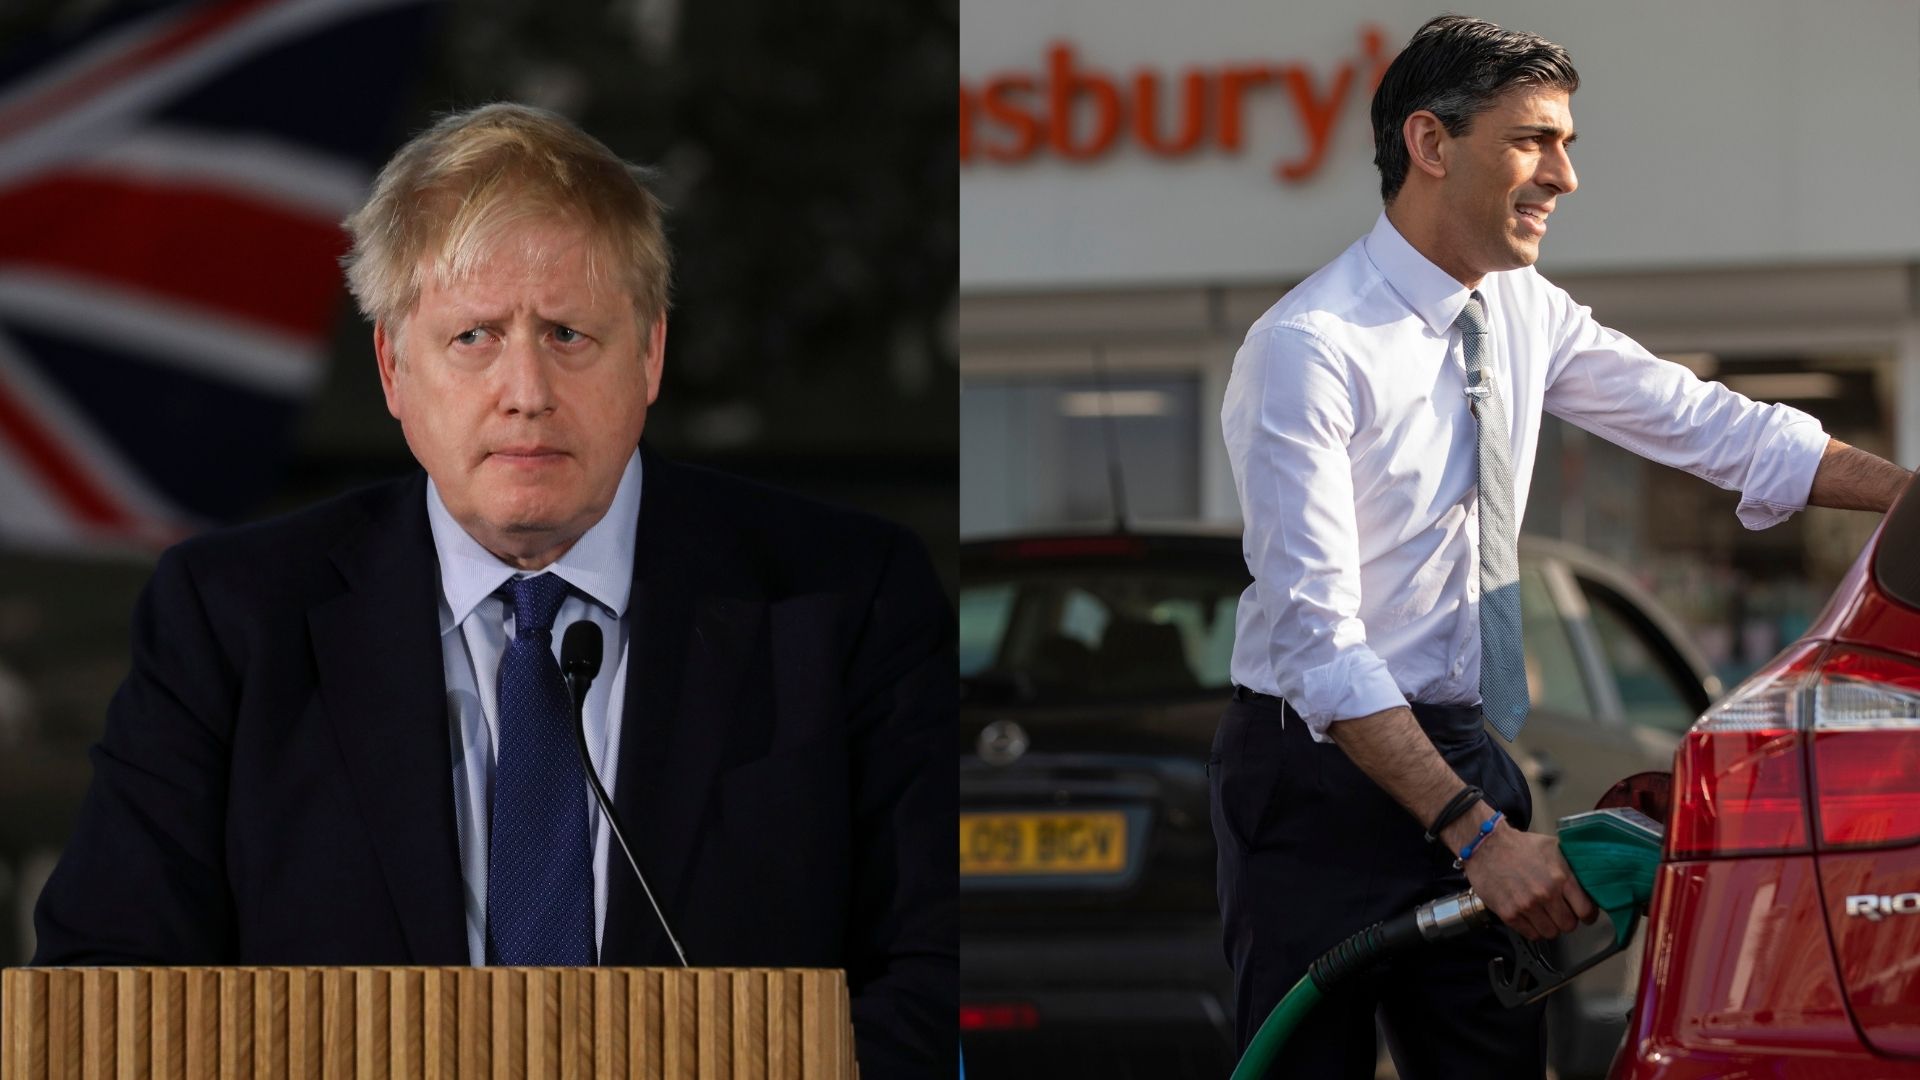 Johnson and Sunak have been under fire for months, damaging public trust in politics.